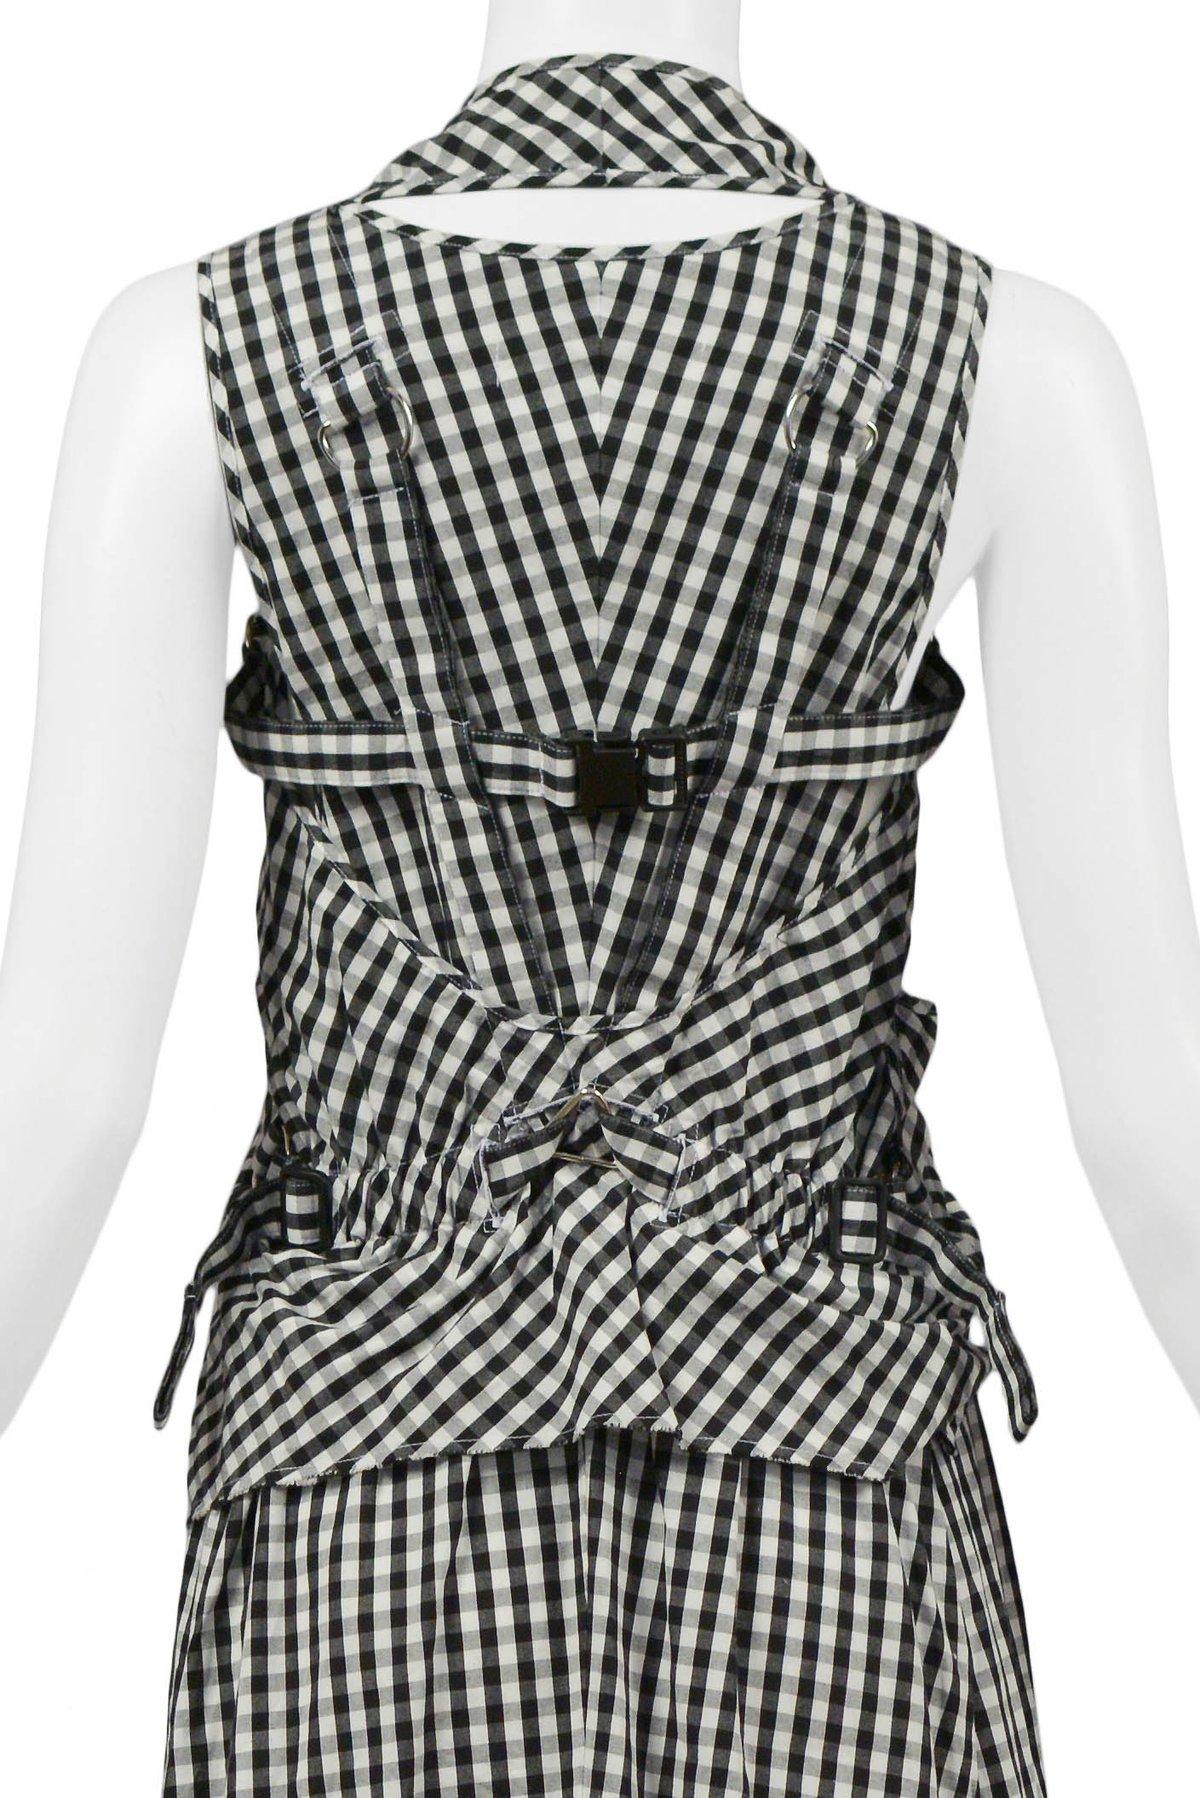 Vintage Junya Watanabe Black & White Gingham Parachute Dress 2003 In Excellent Condition For Sale In Los Angeles, CA